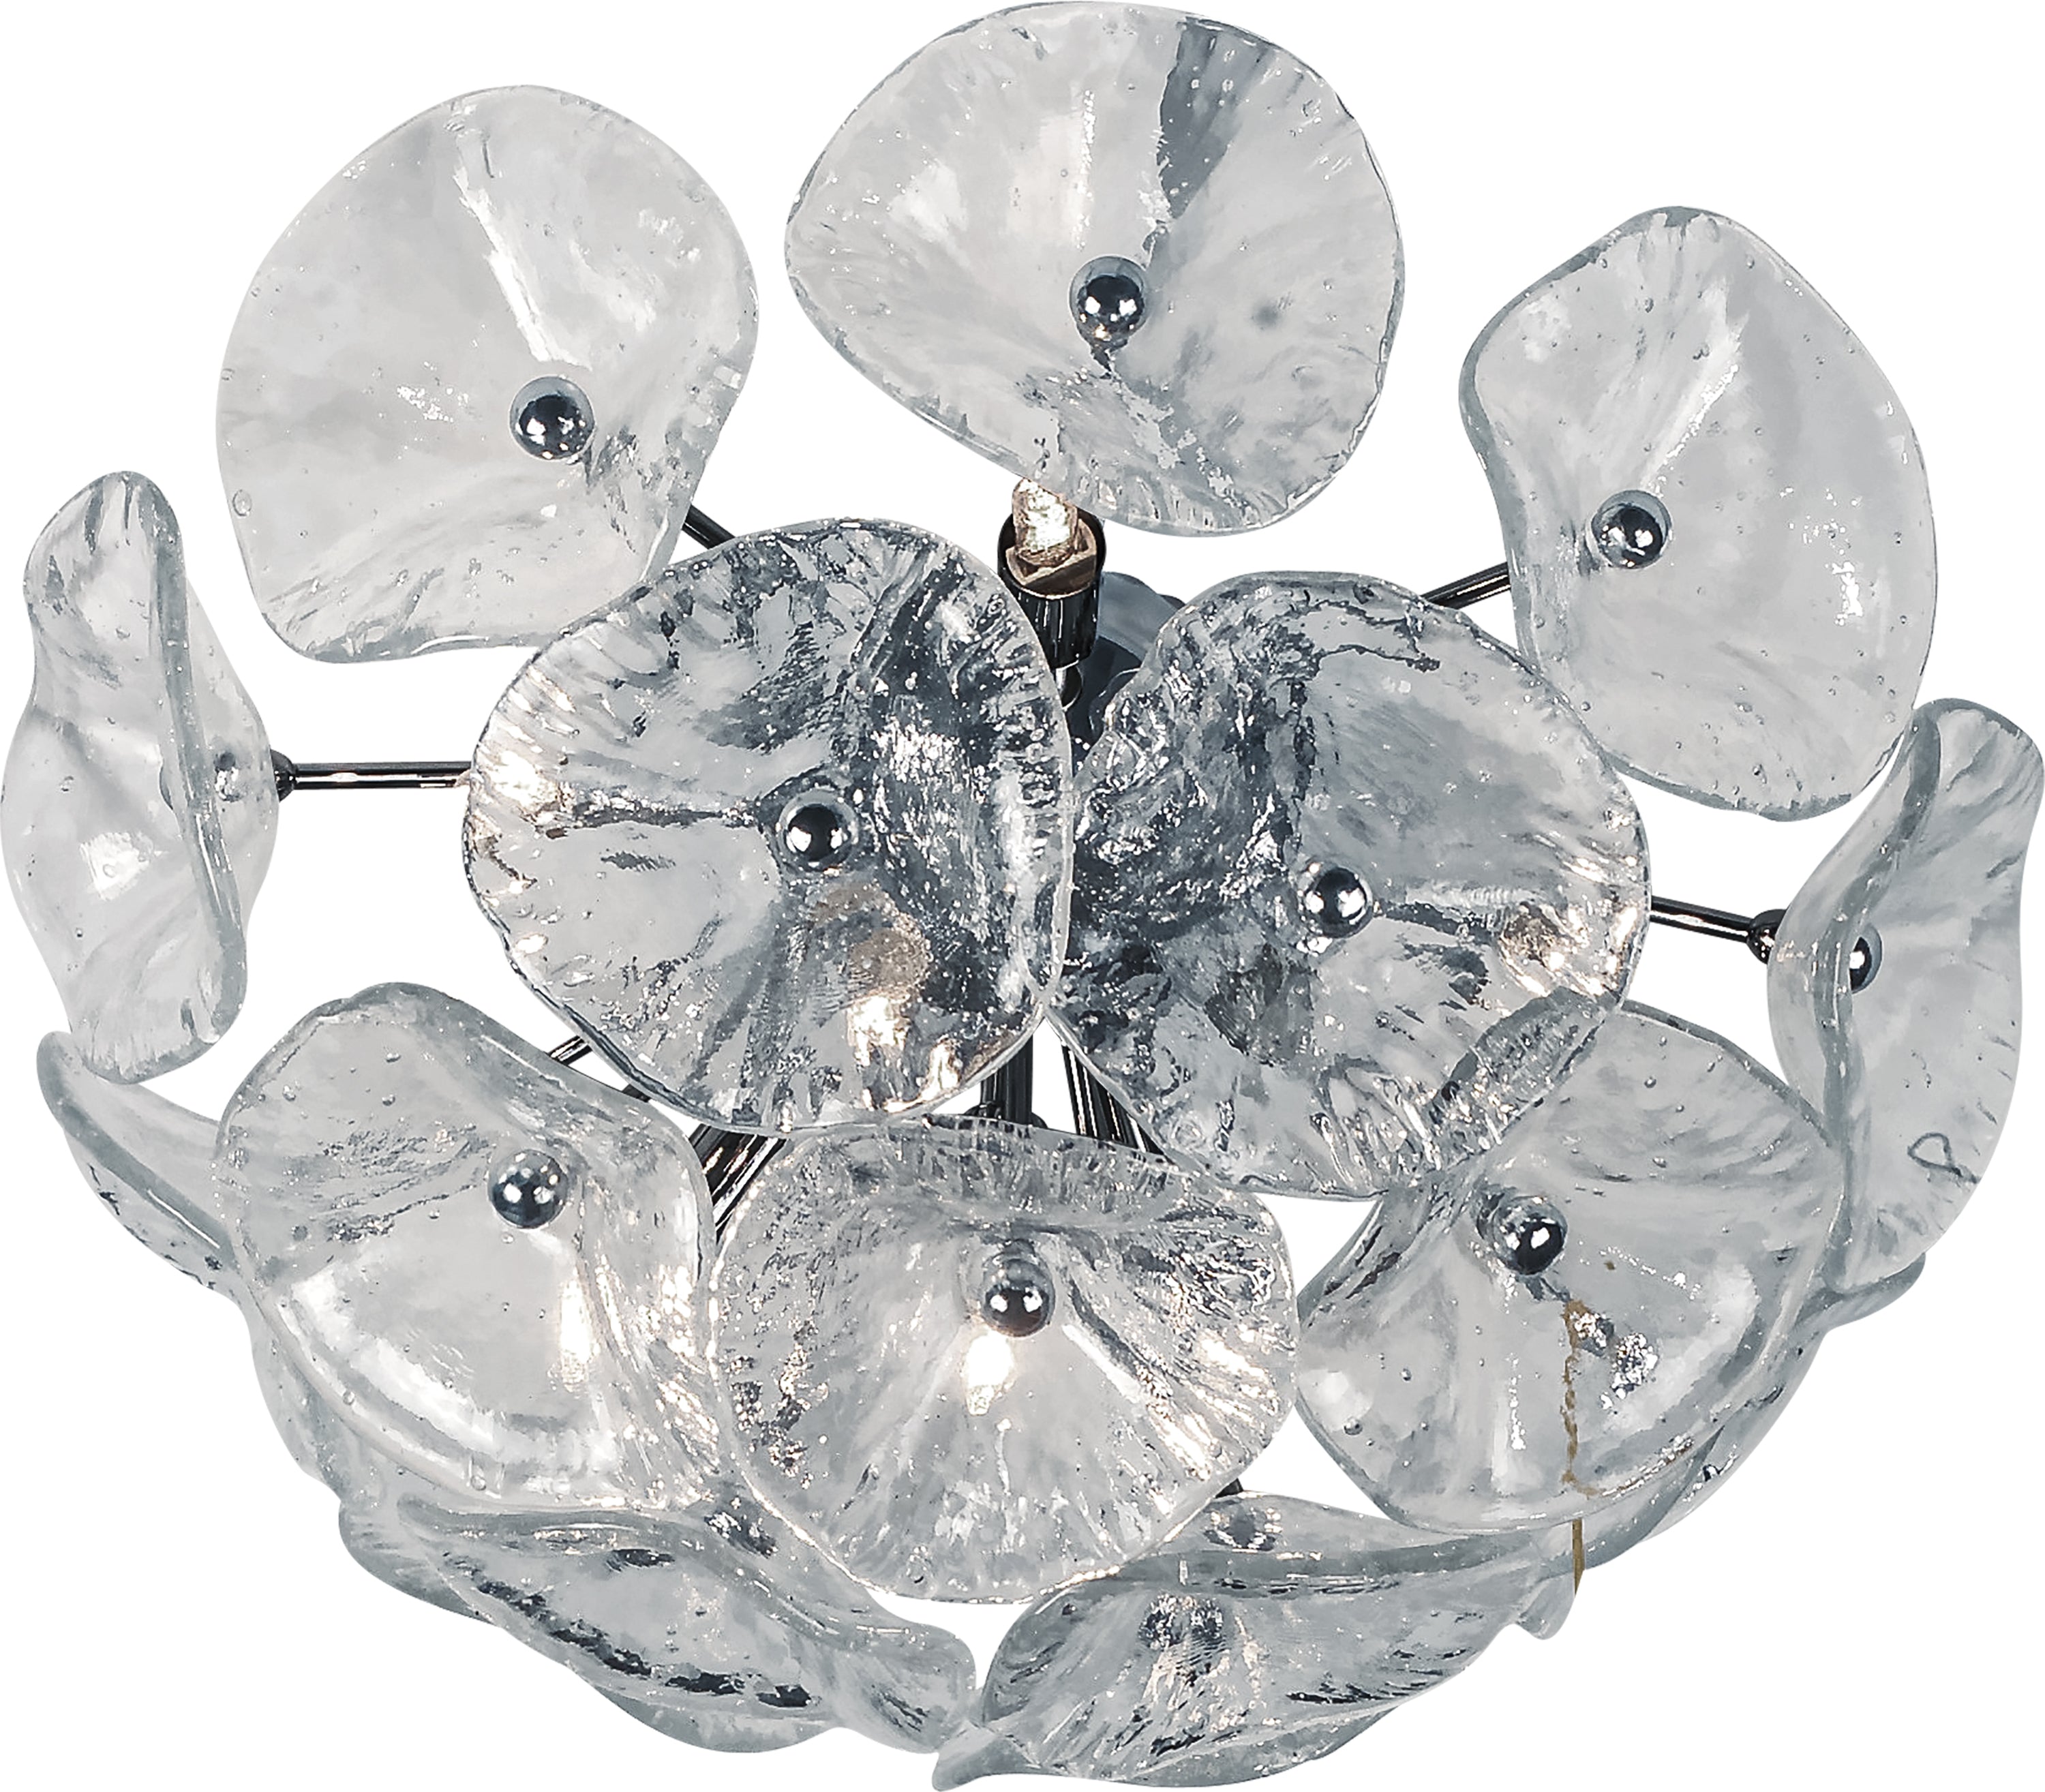 Fiori-Wall Sconce Wall Light Fixtures ET2 x16.5x8.75 Polished Chrome 